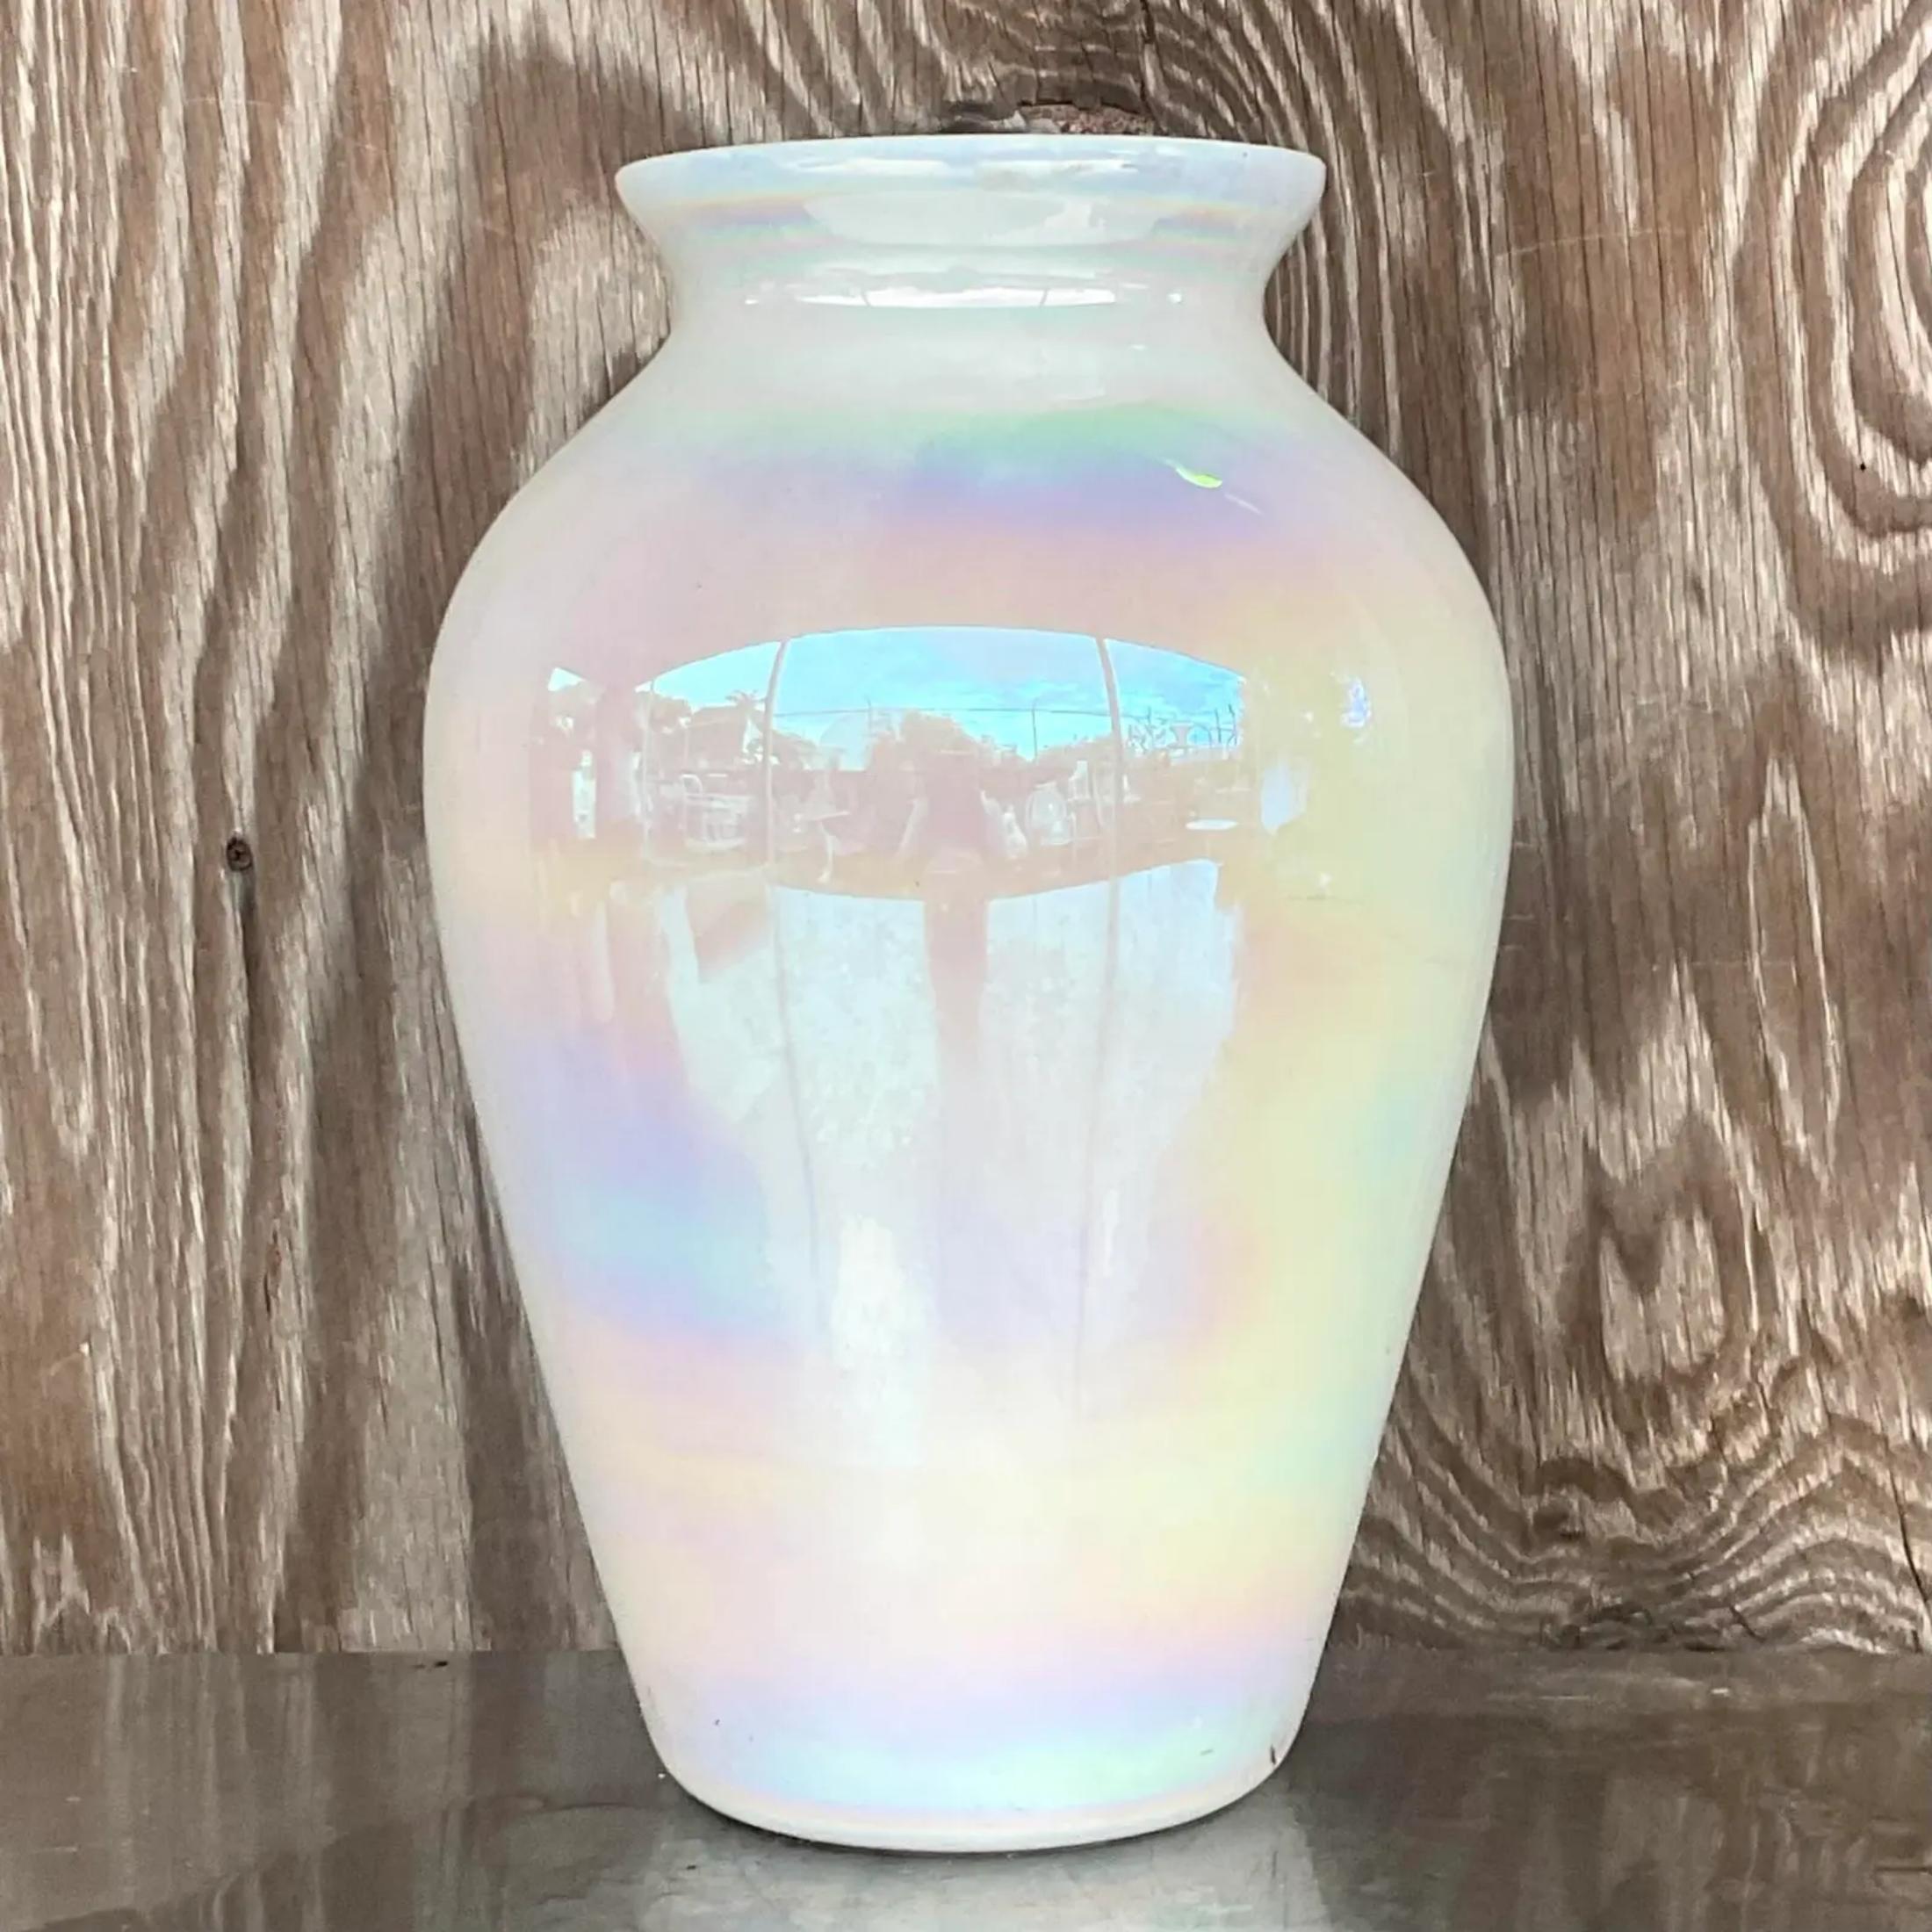 A beautiful vintage Boho white glass vase. A chic iridescent glaze gives it an almost bubble like coloration. A great way to add a little flash of glamour to any space. Acquired from a Palm Beach estate.